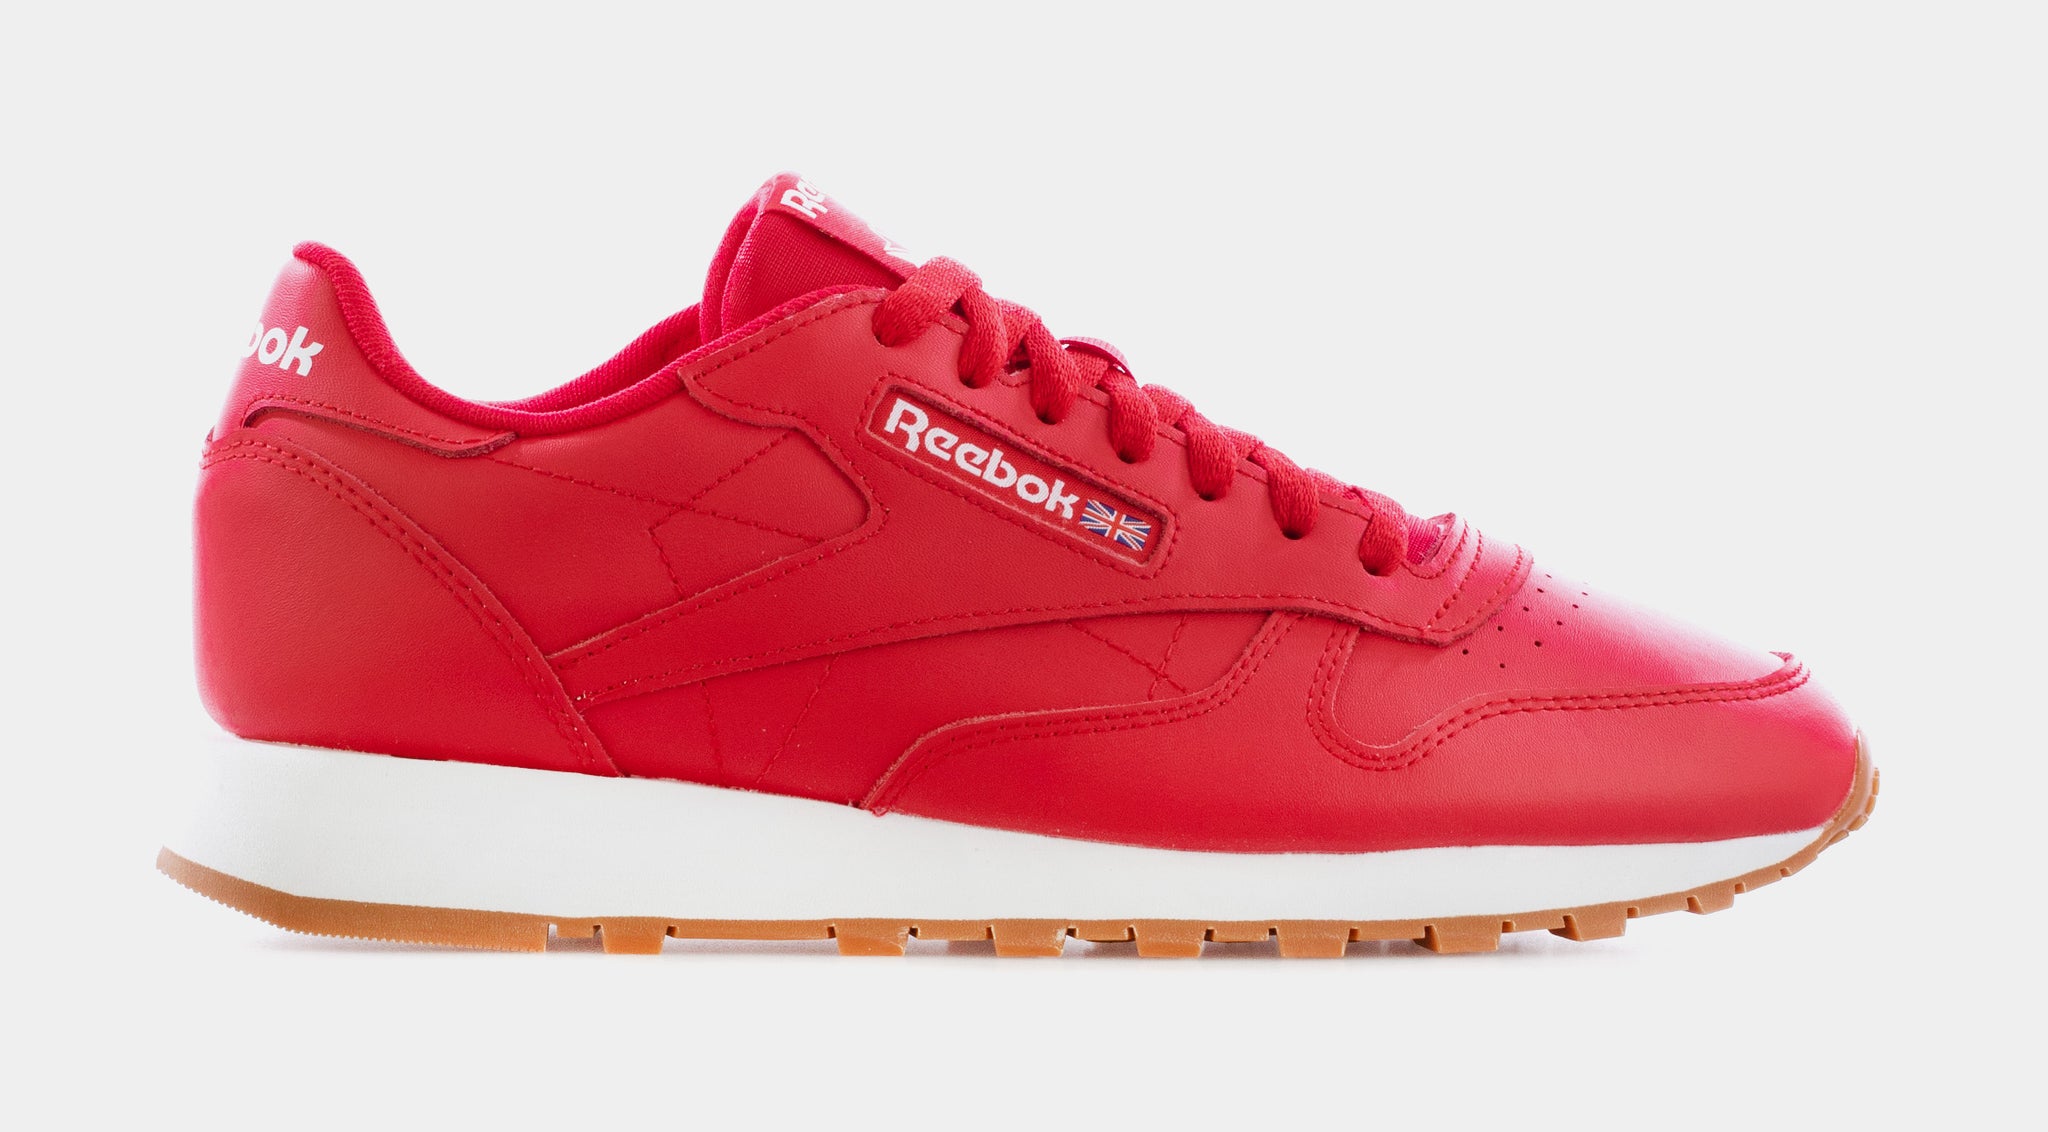 Reebok Classic Leather Mens Palace Shoes Red Shoe – GY3601 Lifestyle